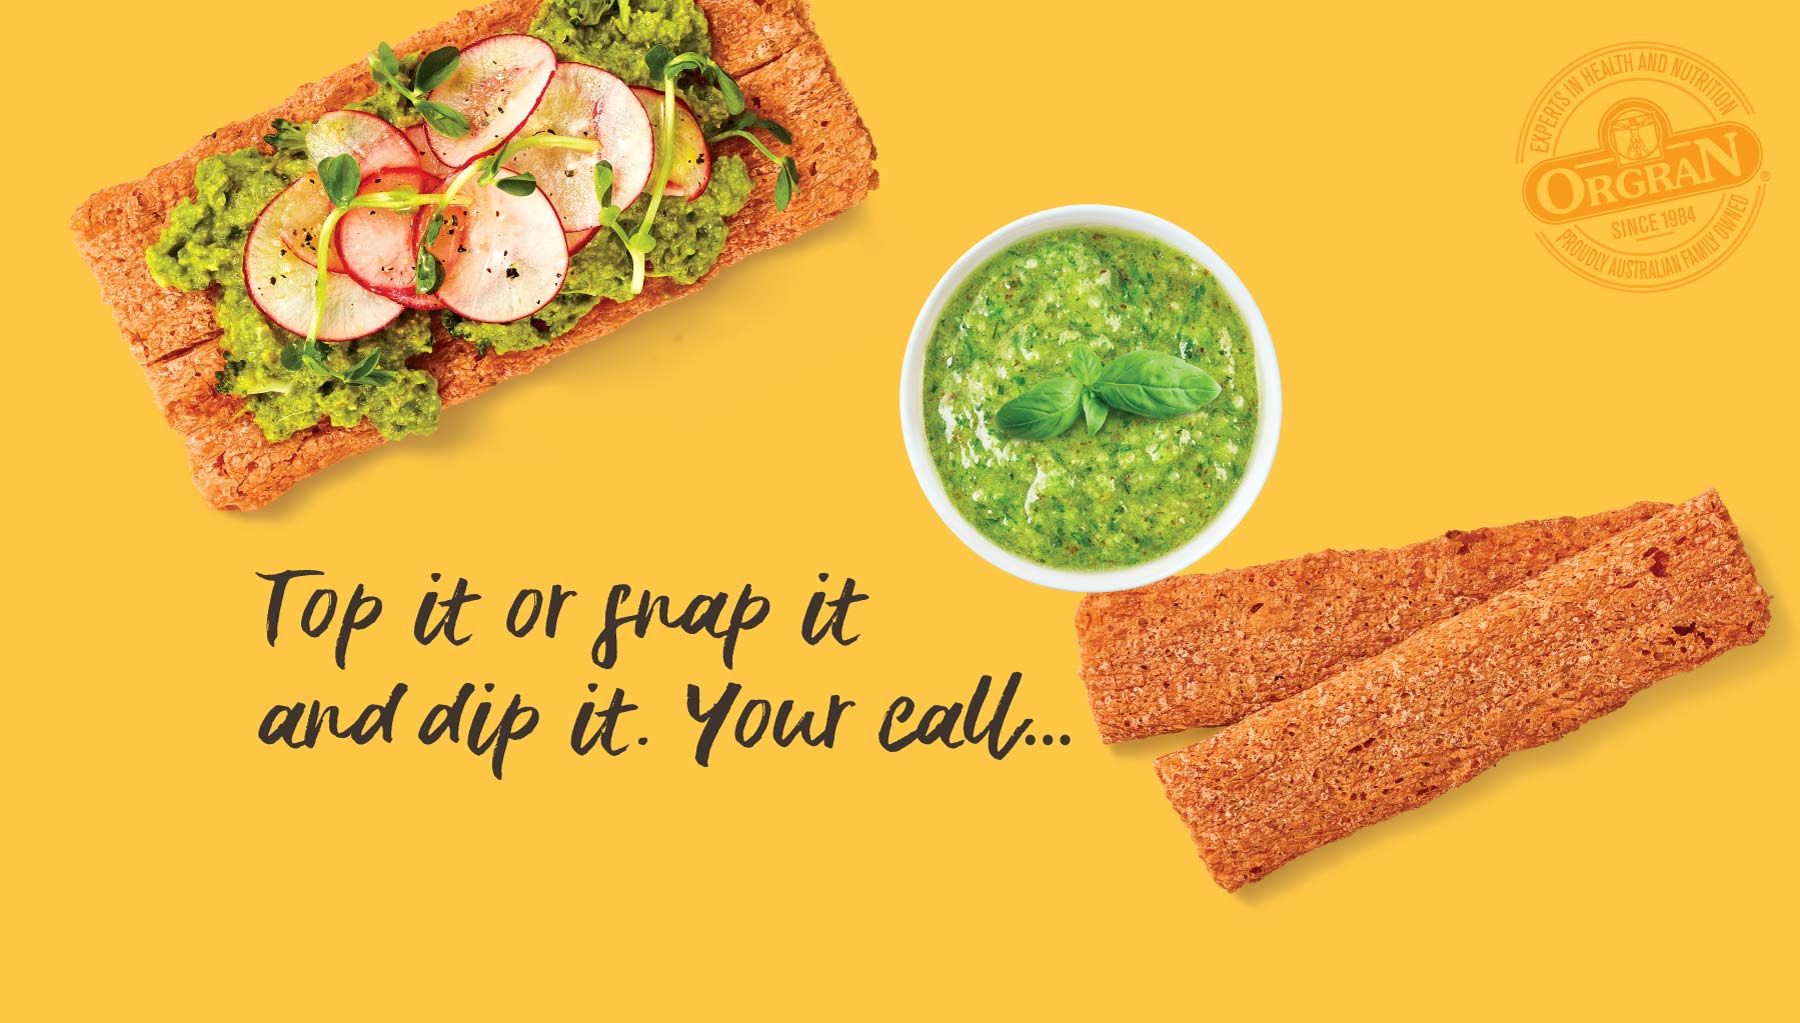 Top it or snap it and dip it. Your call...